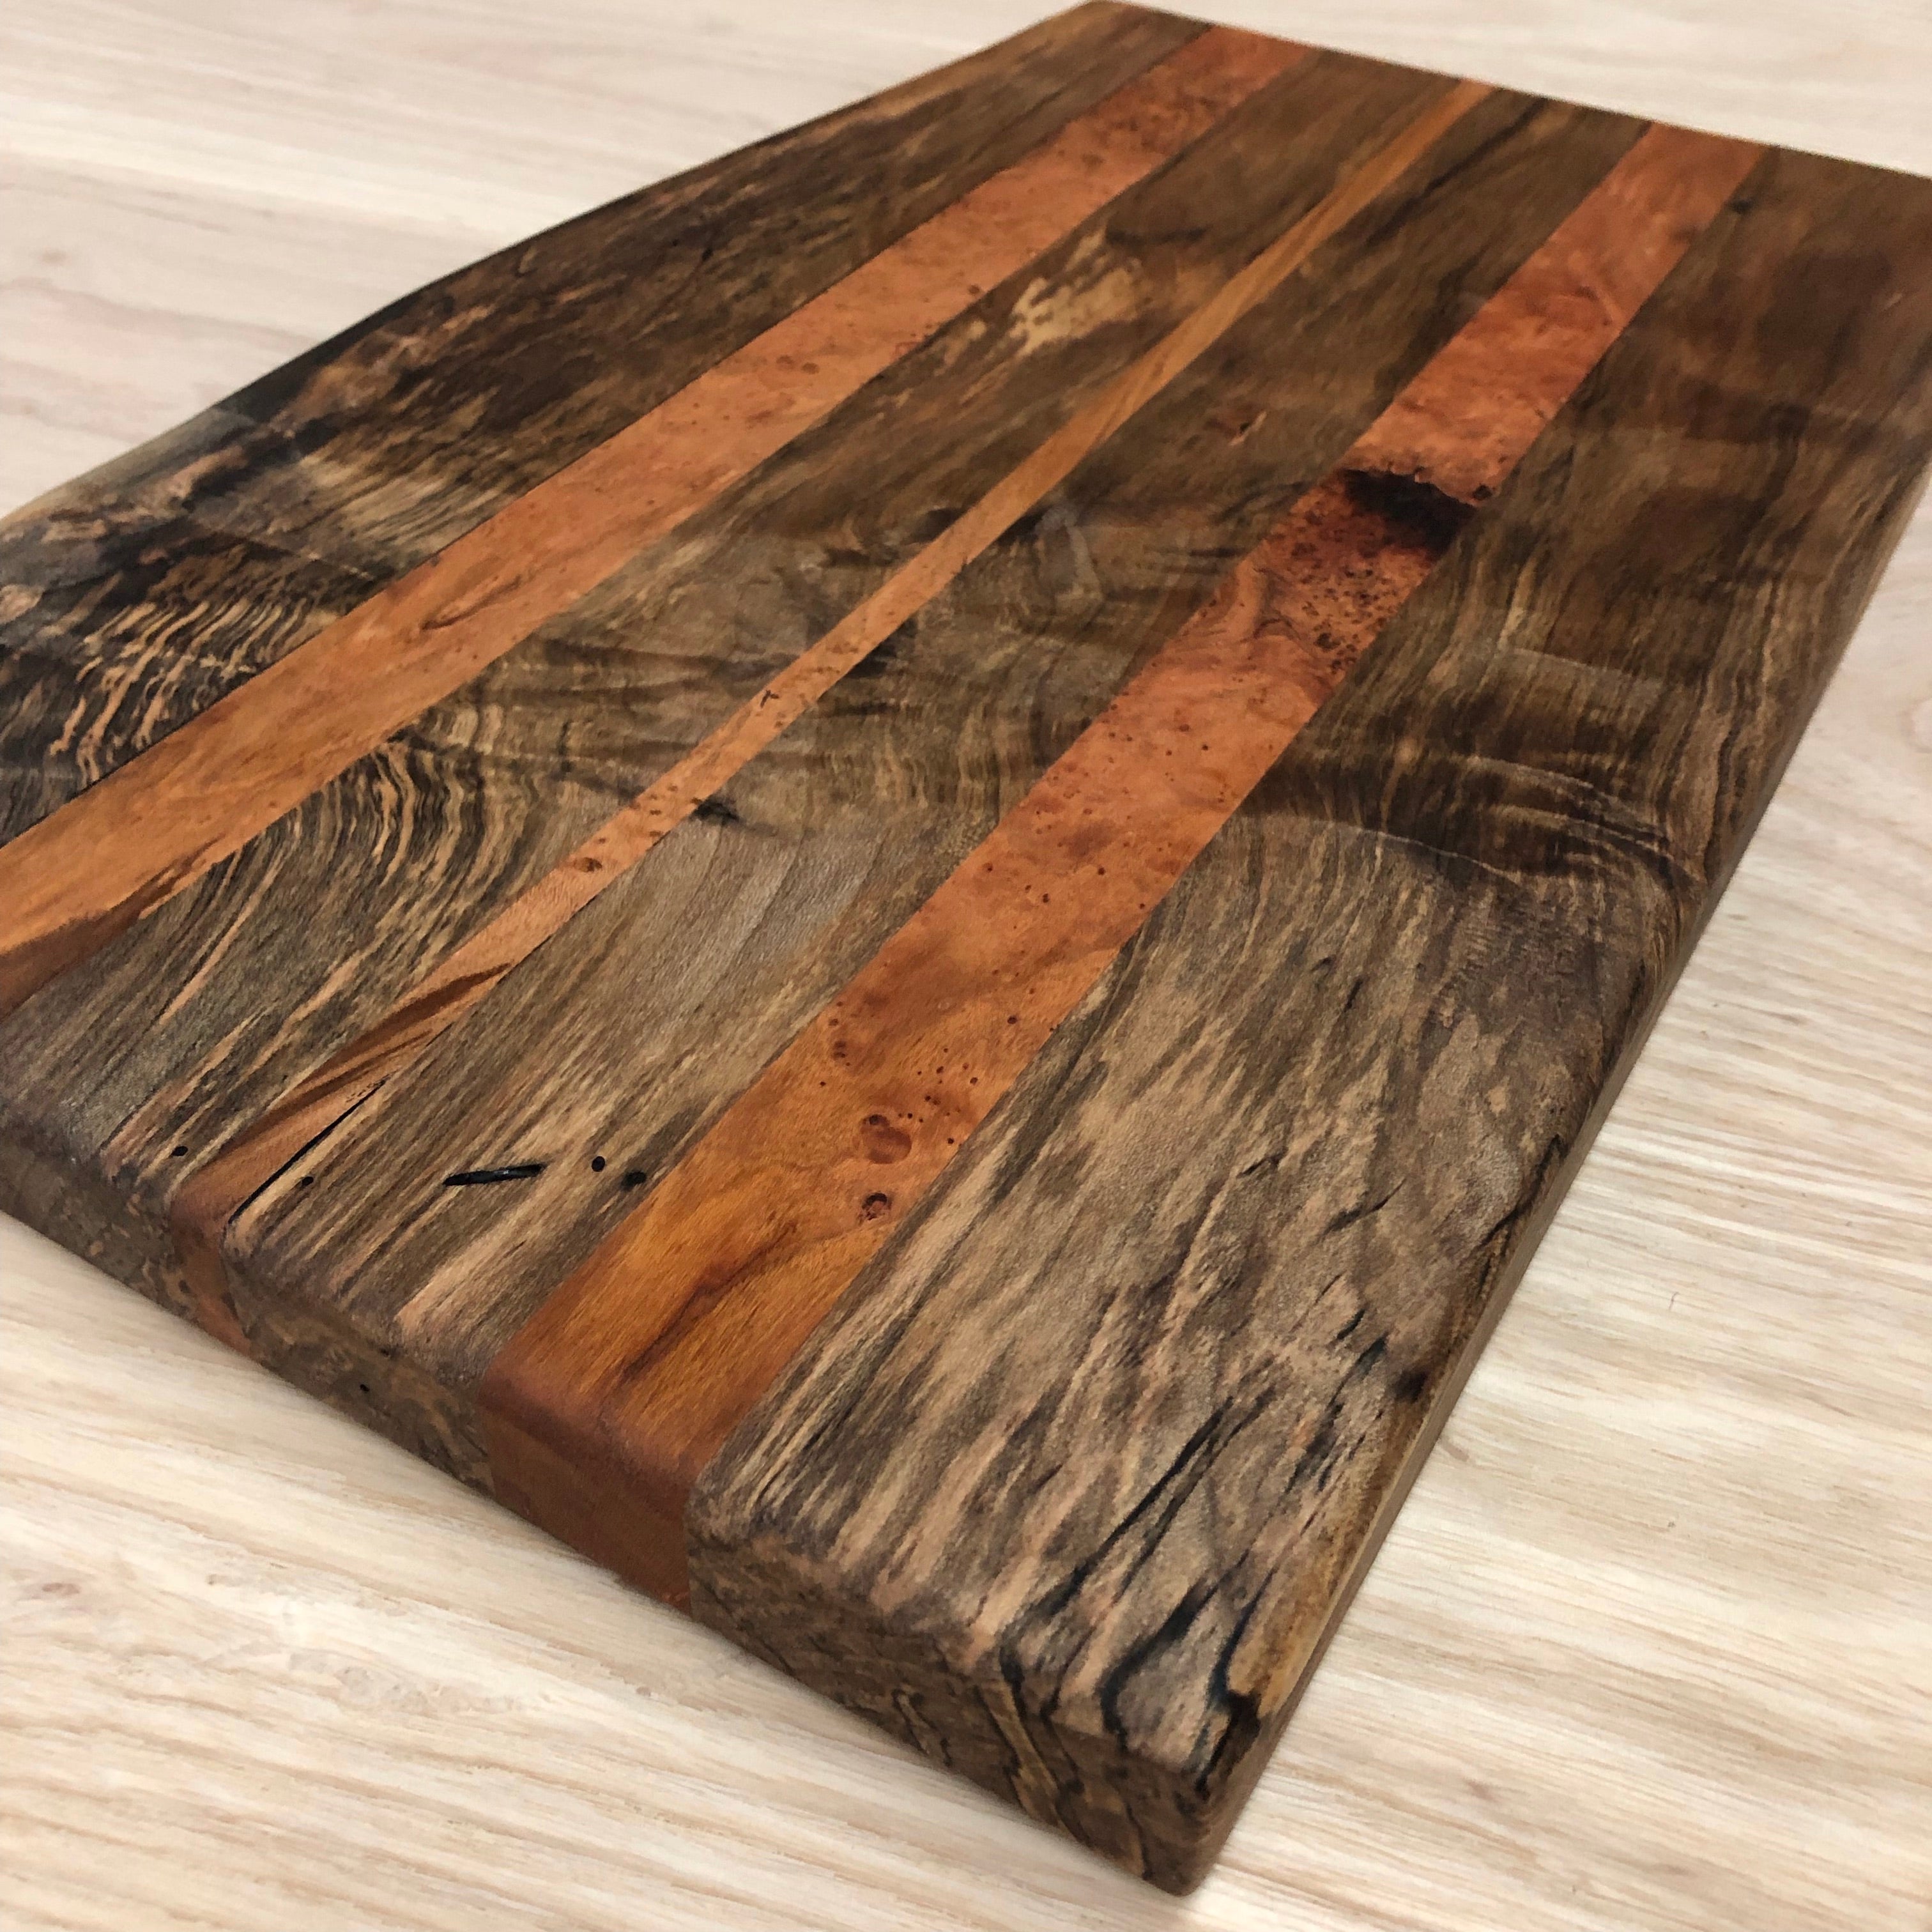 Spalted Maple Charcuterie Board With Cherry Burl Accents